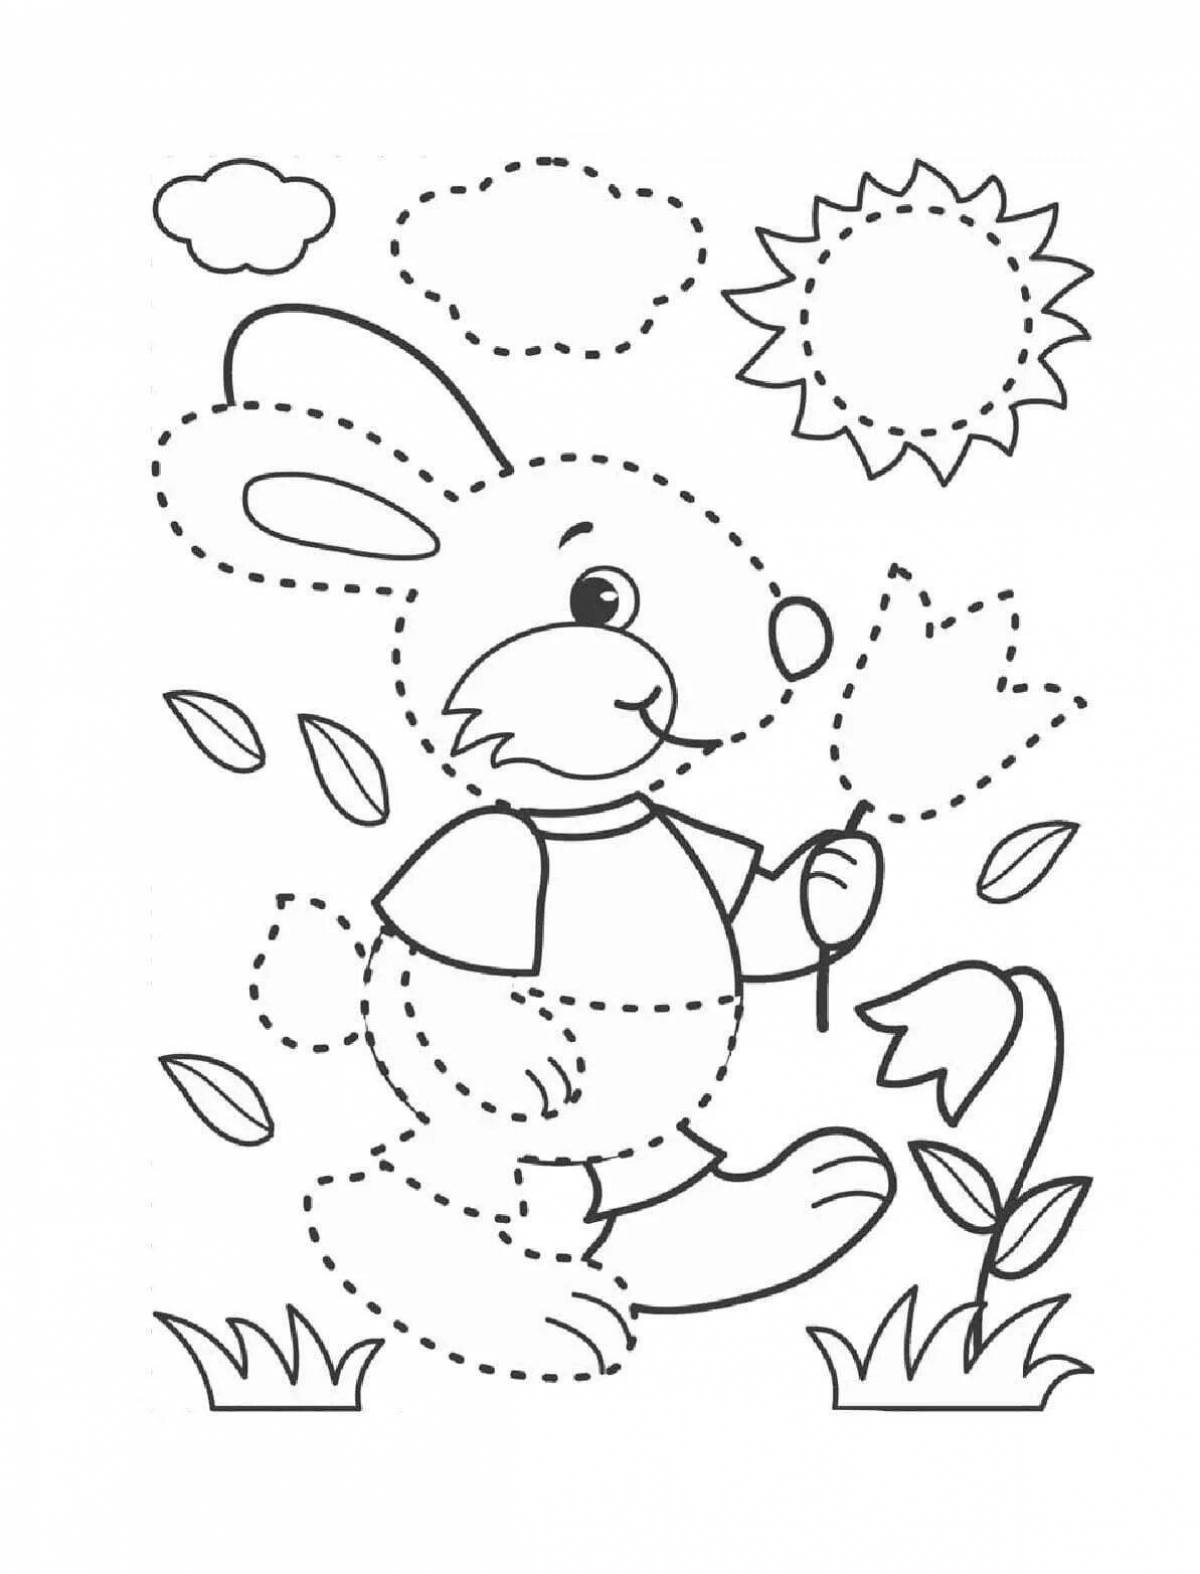 Exciting circle coloring page